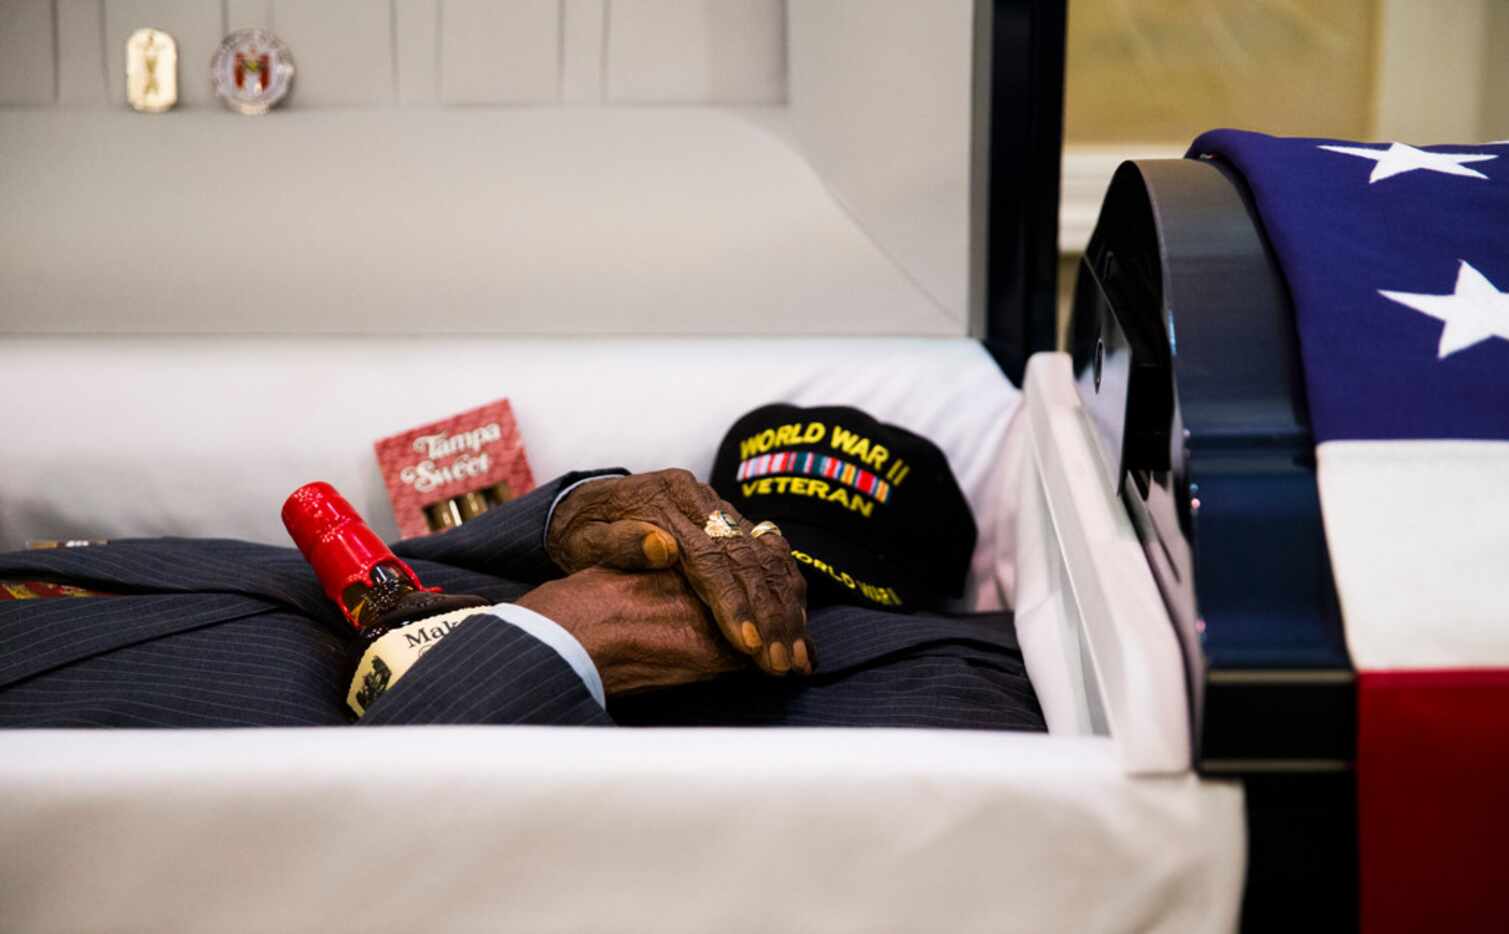 Richard Overton's hands rest on a bottle of Maker's Mark Whiskey and Tampa Sweet cigars lay...